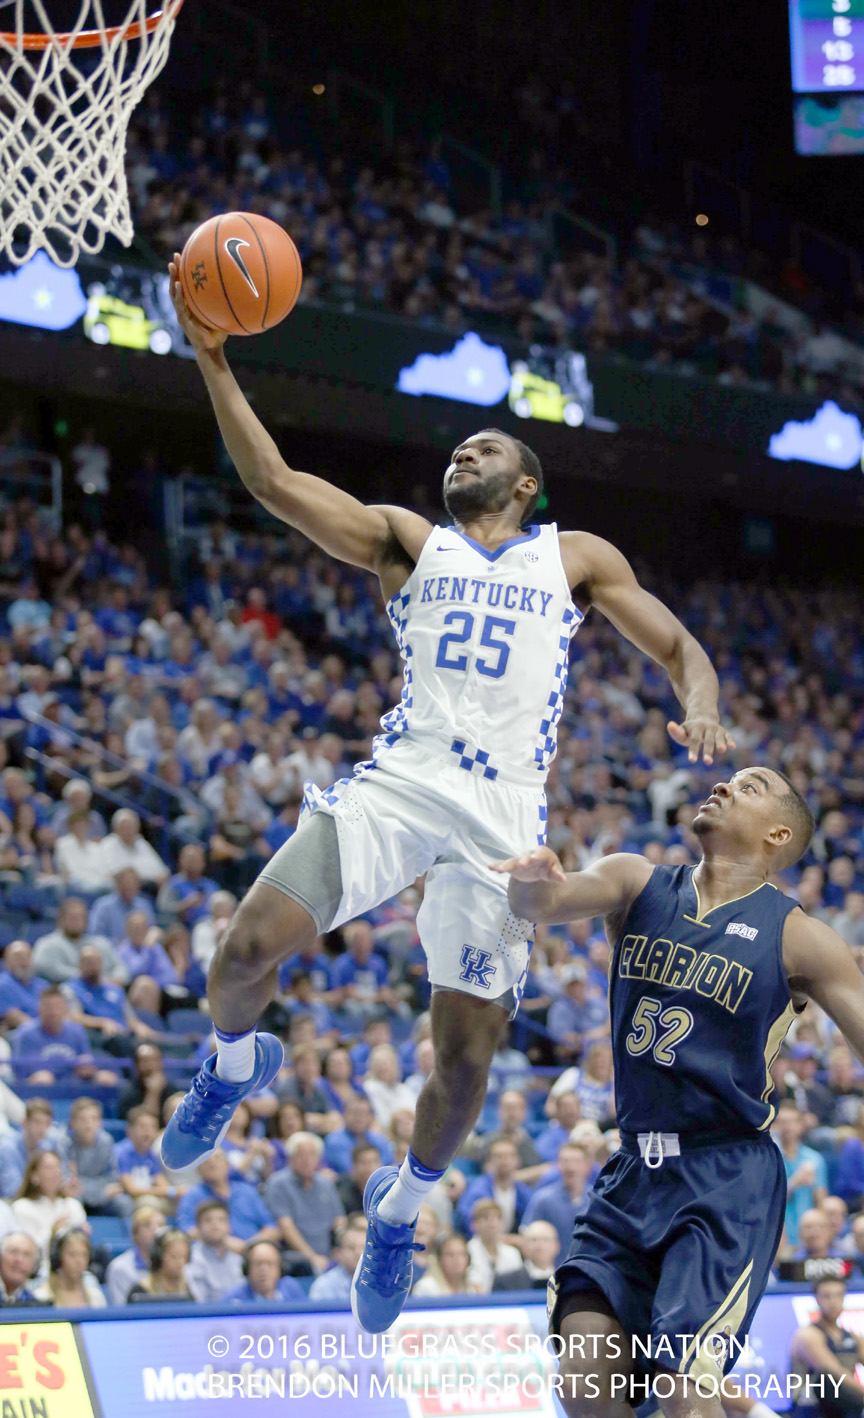 UK Smacks down Clarion 108-51 (Photo by Brendon Miller)